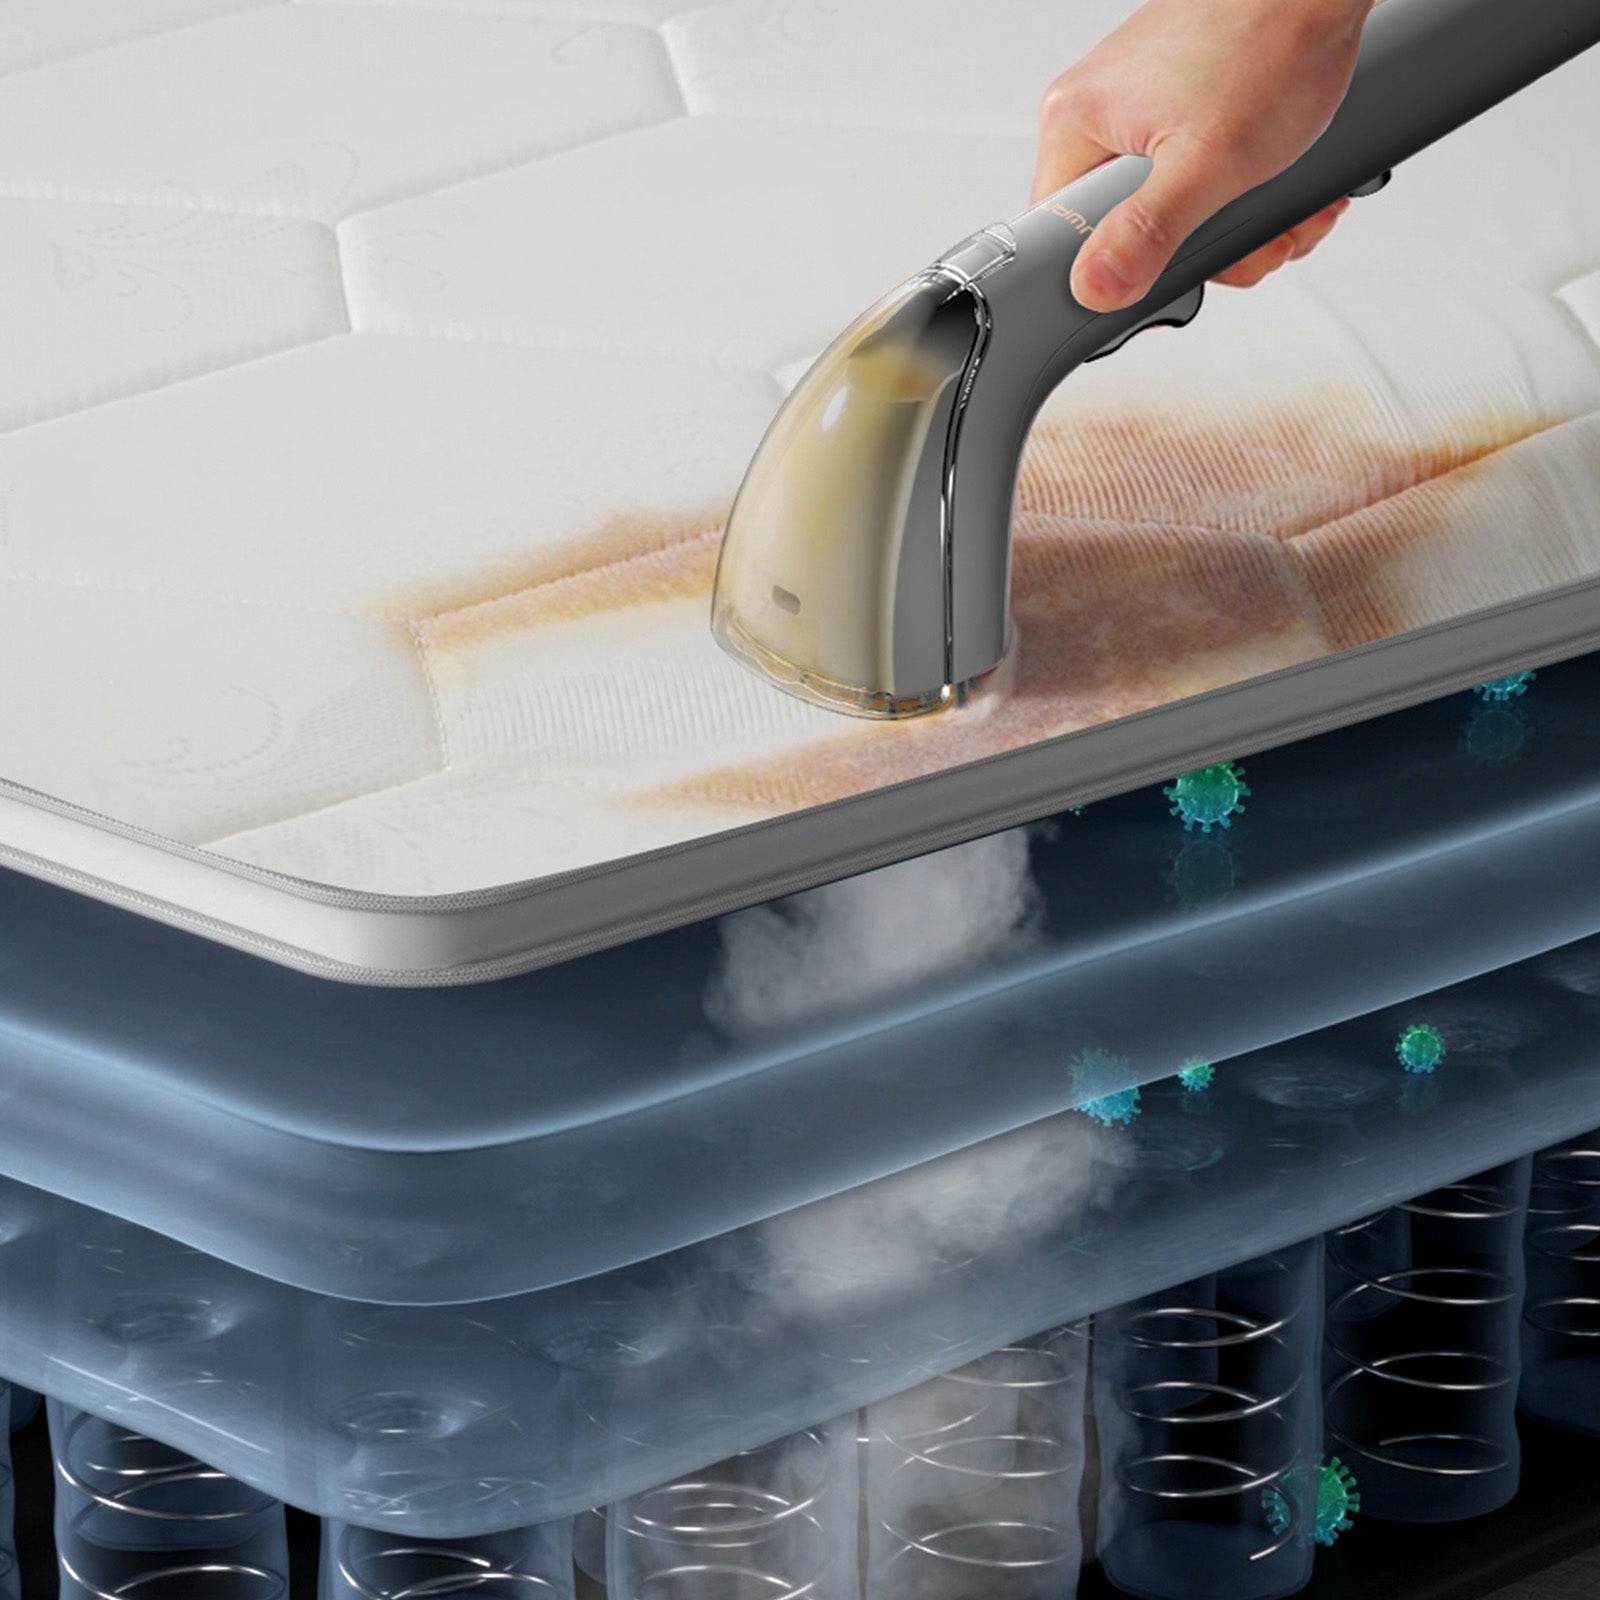 Uwant B200 combines high-pressure spray,steaming, washing, scrubbing, and vacuuming